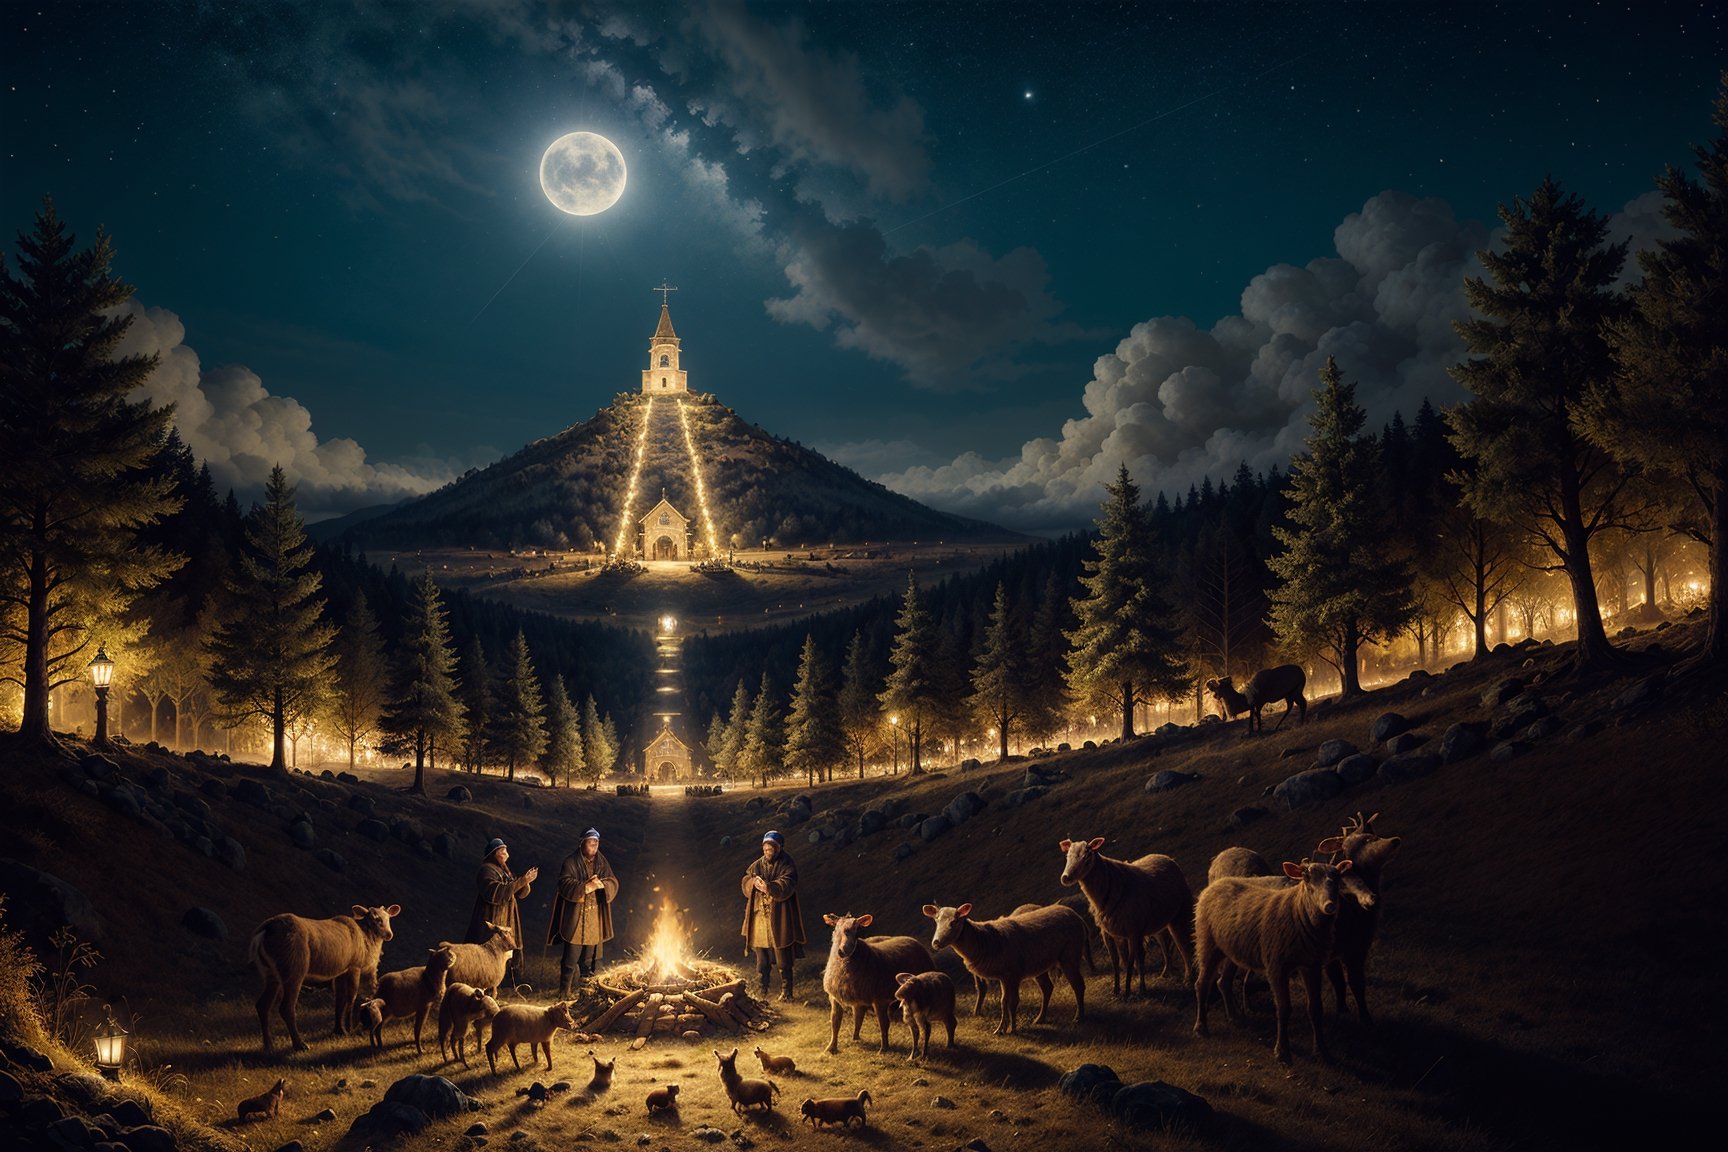 The holy night when Christ was born scenery with shepherds in the field
Masterpiece,ayaka_genshin,More Detail,fantasy00d,FFIXBG,EpicArt,Nature,Landscape